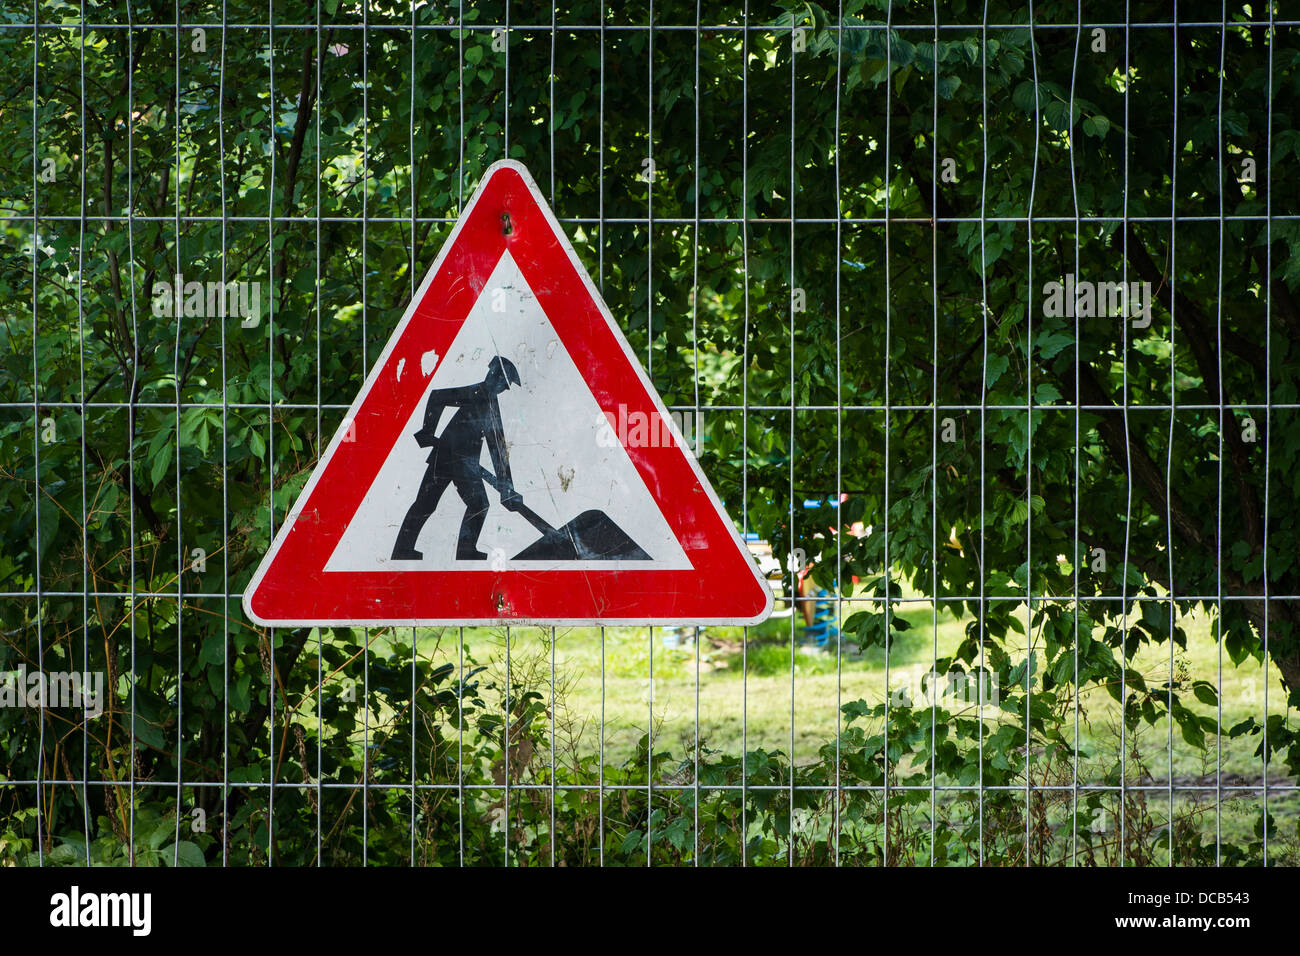 Men at Work Safety Sign Stock Photo